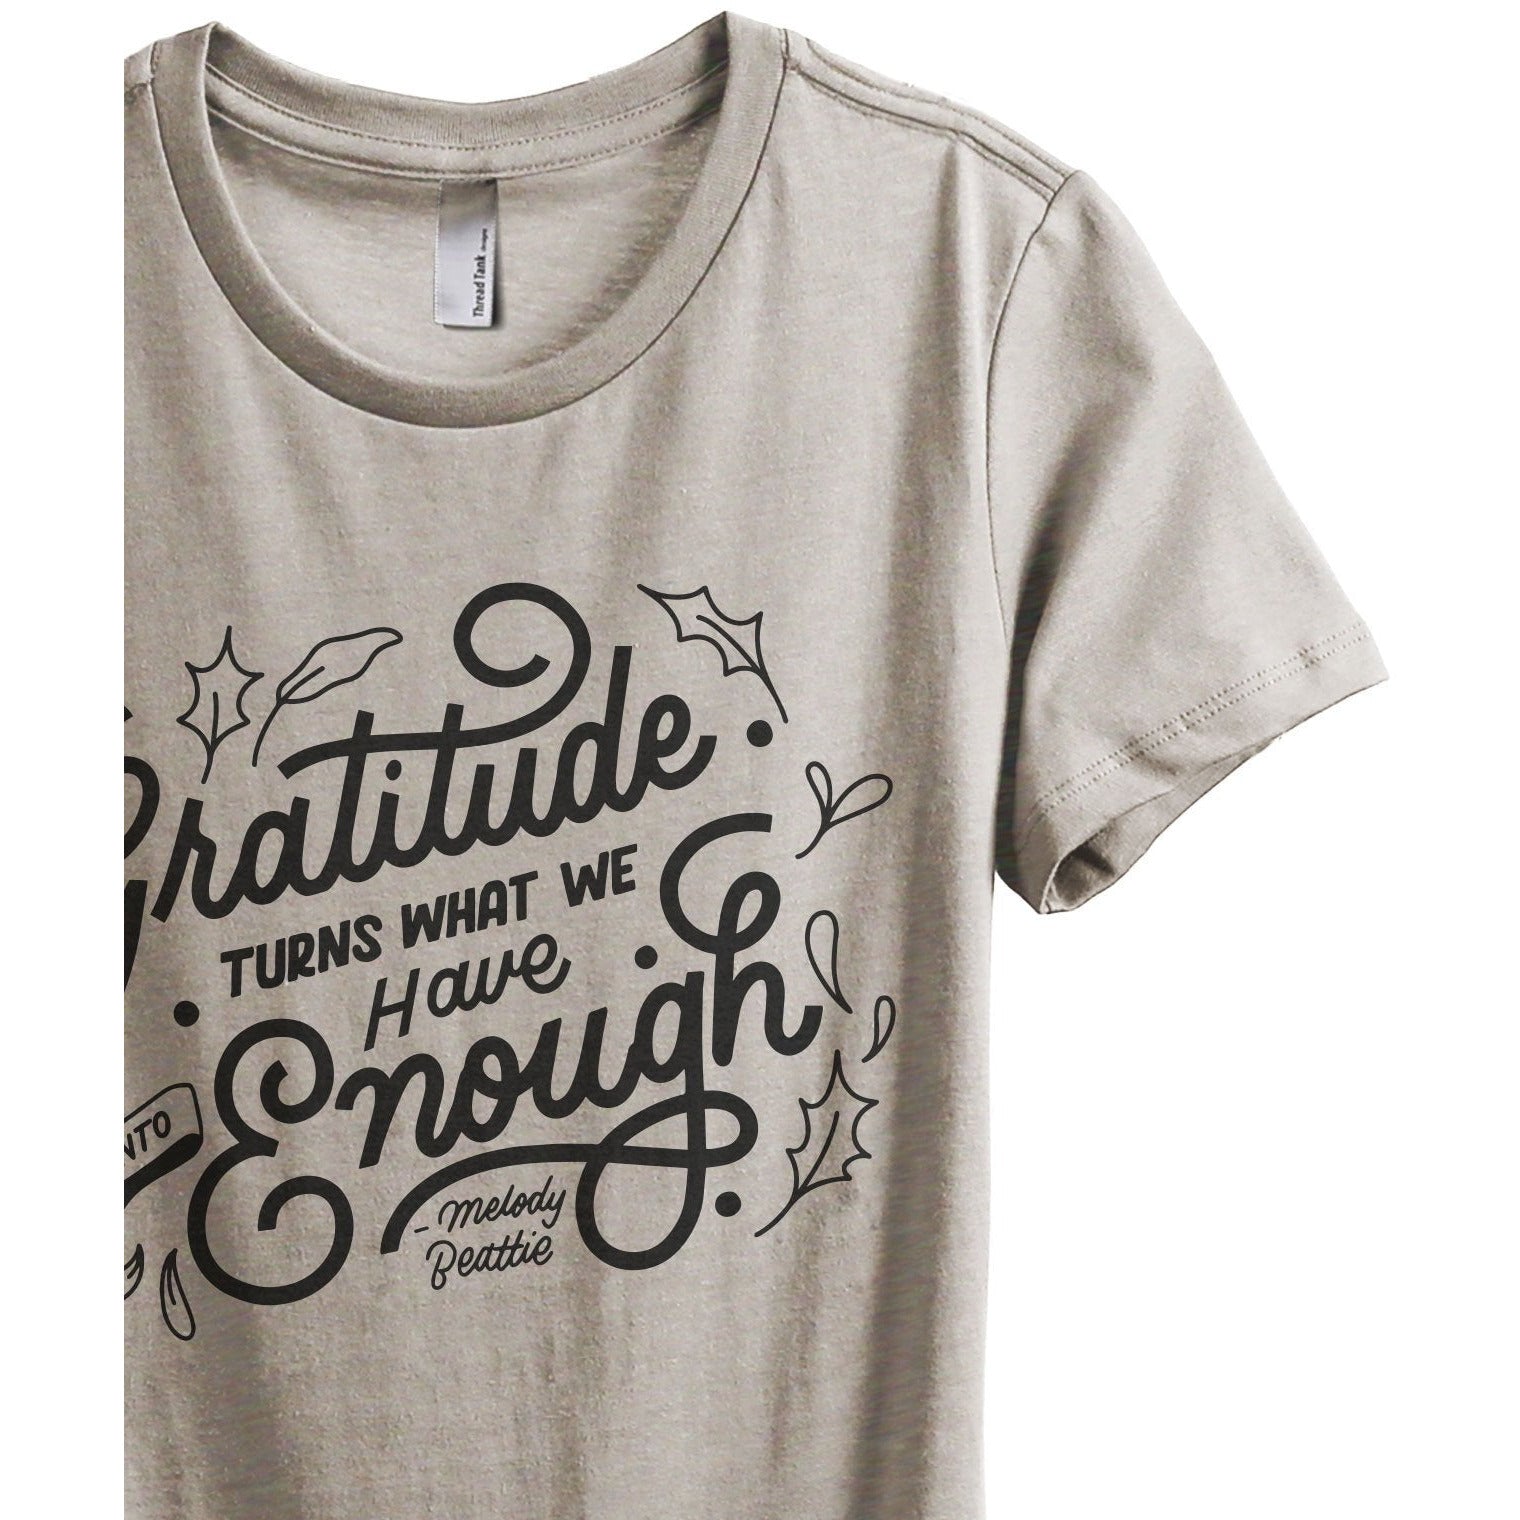 Gratitude Turns What We Have Into Enough Women's Relaxed Crewneck T-Shirt Top Tee Heather Tan Grey Zoom Details